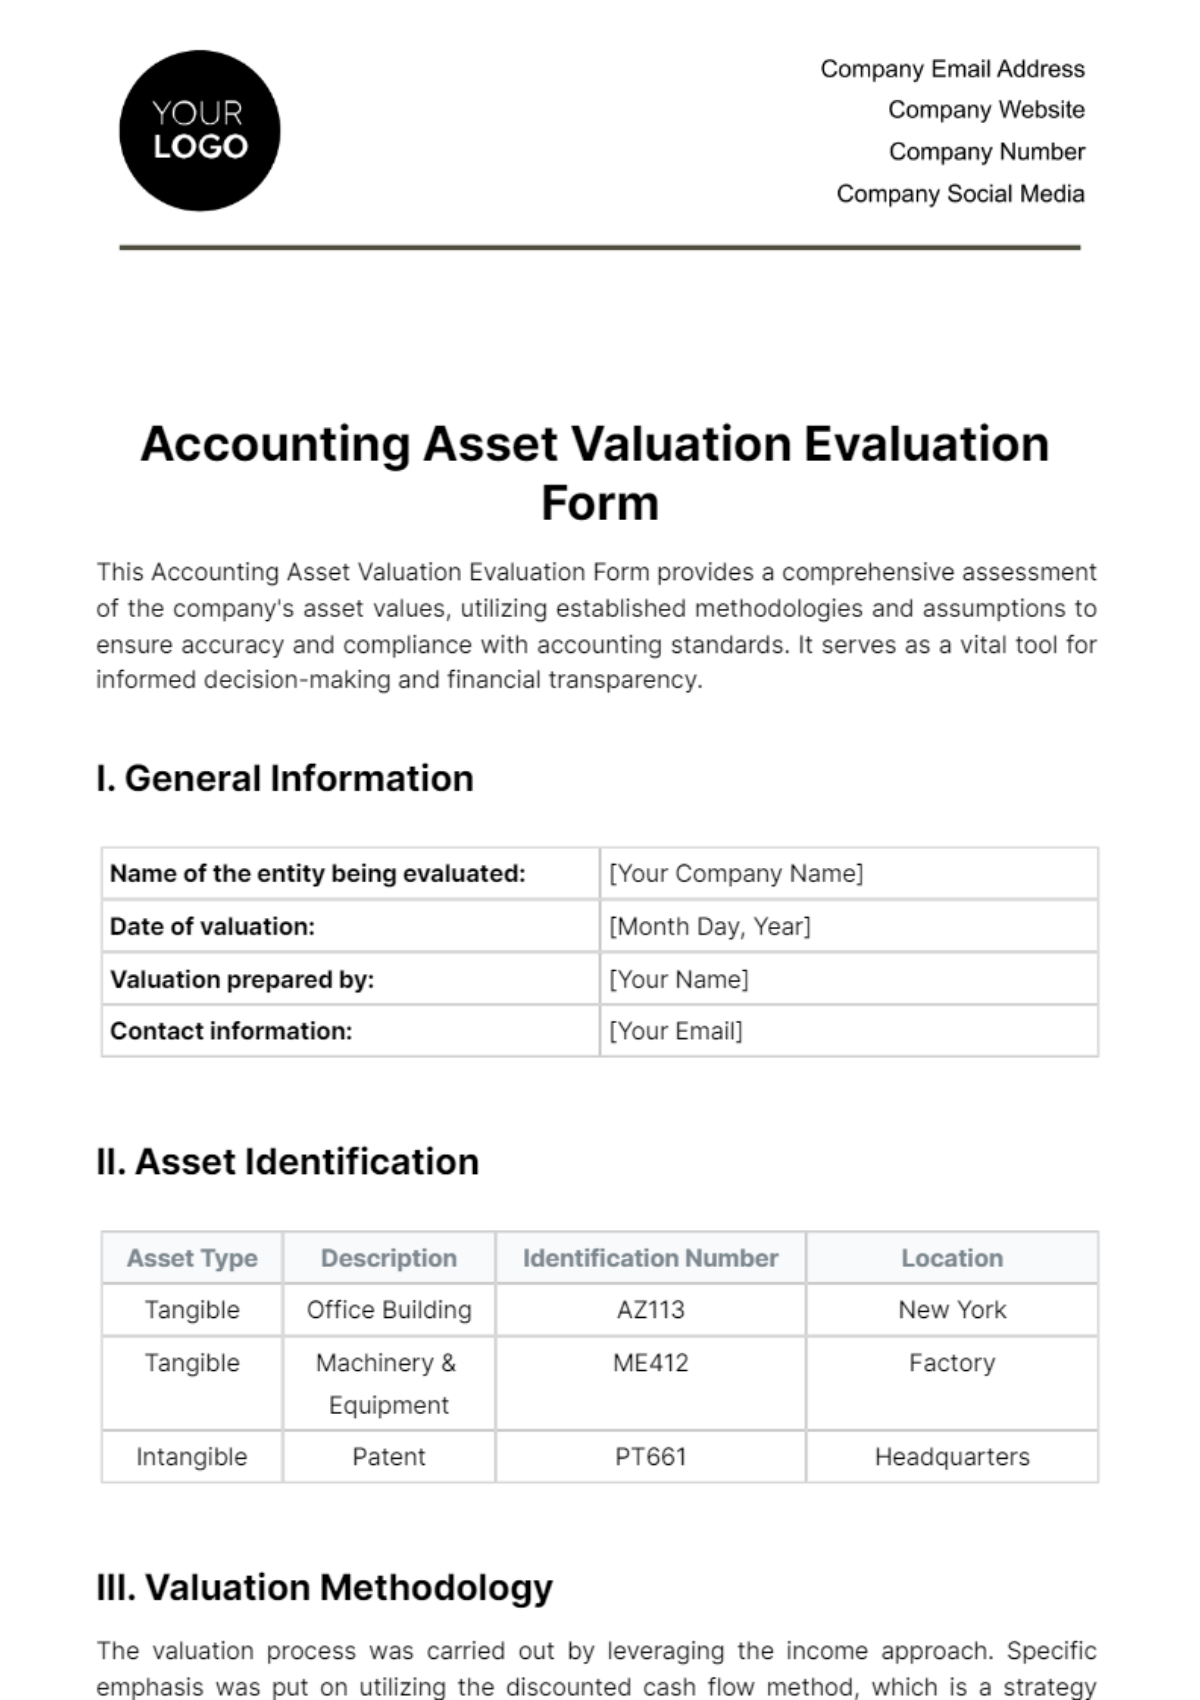 Accounting Asset Valuation Evaluation Form Template